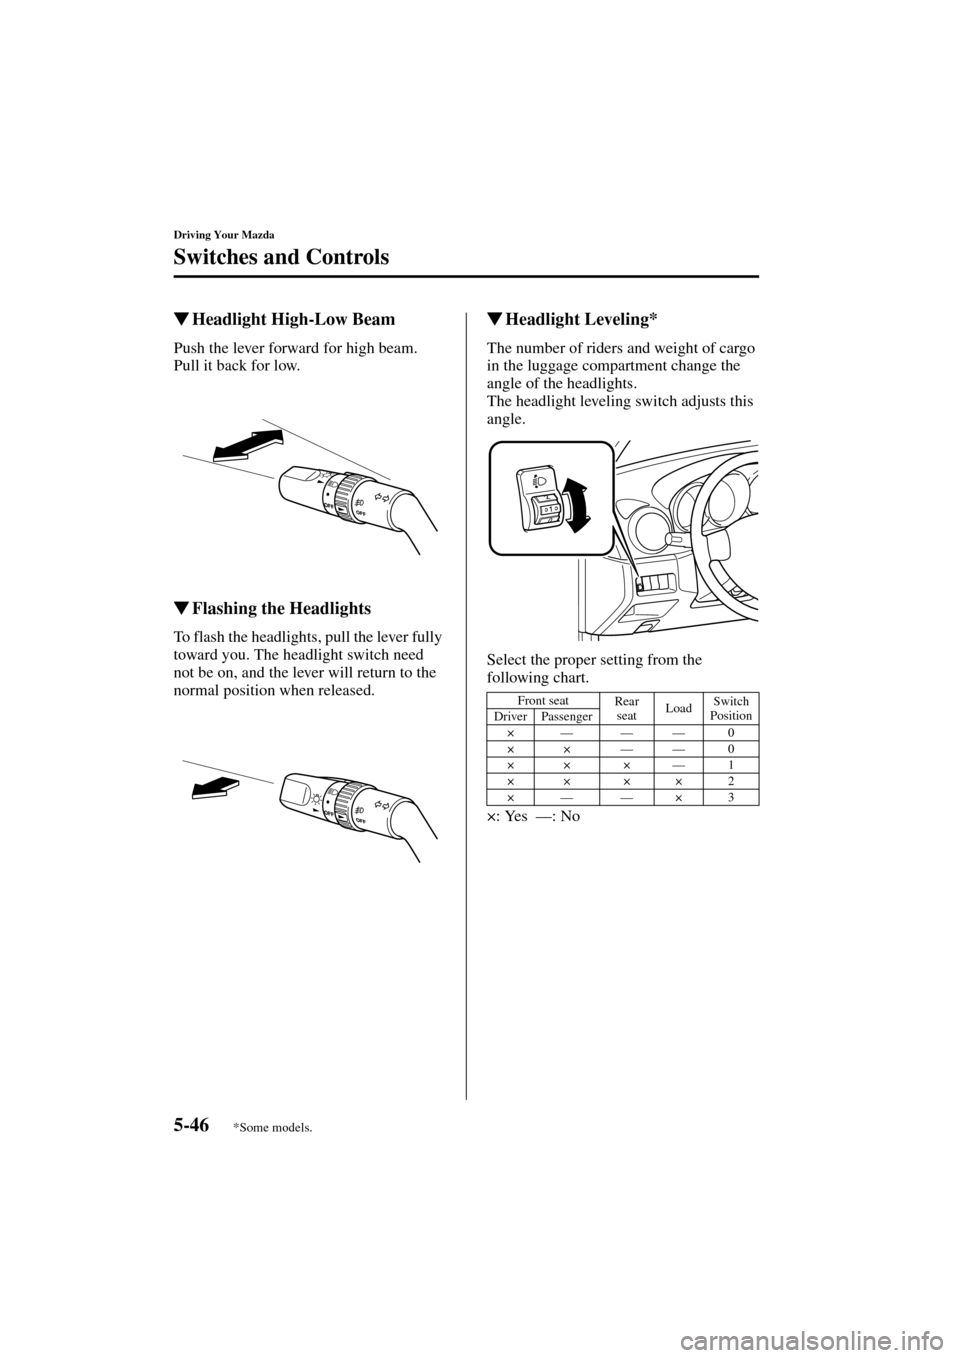 MAZDA MODEL 3 HATCHBACK 2004  Owners Manual (in English) 5-46
Driving Your Mazda
Switches and Controls
Form No. 8S18-EA-03I
Headlight High-Low Beam
Push the lever forward for high beam.
Pull it back for low.
Flashing the Headlights
To flash the headlights